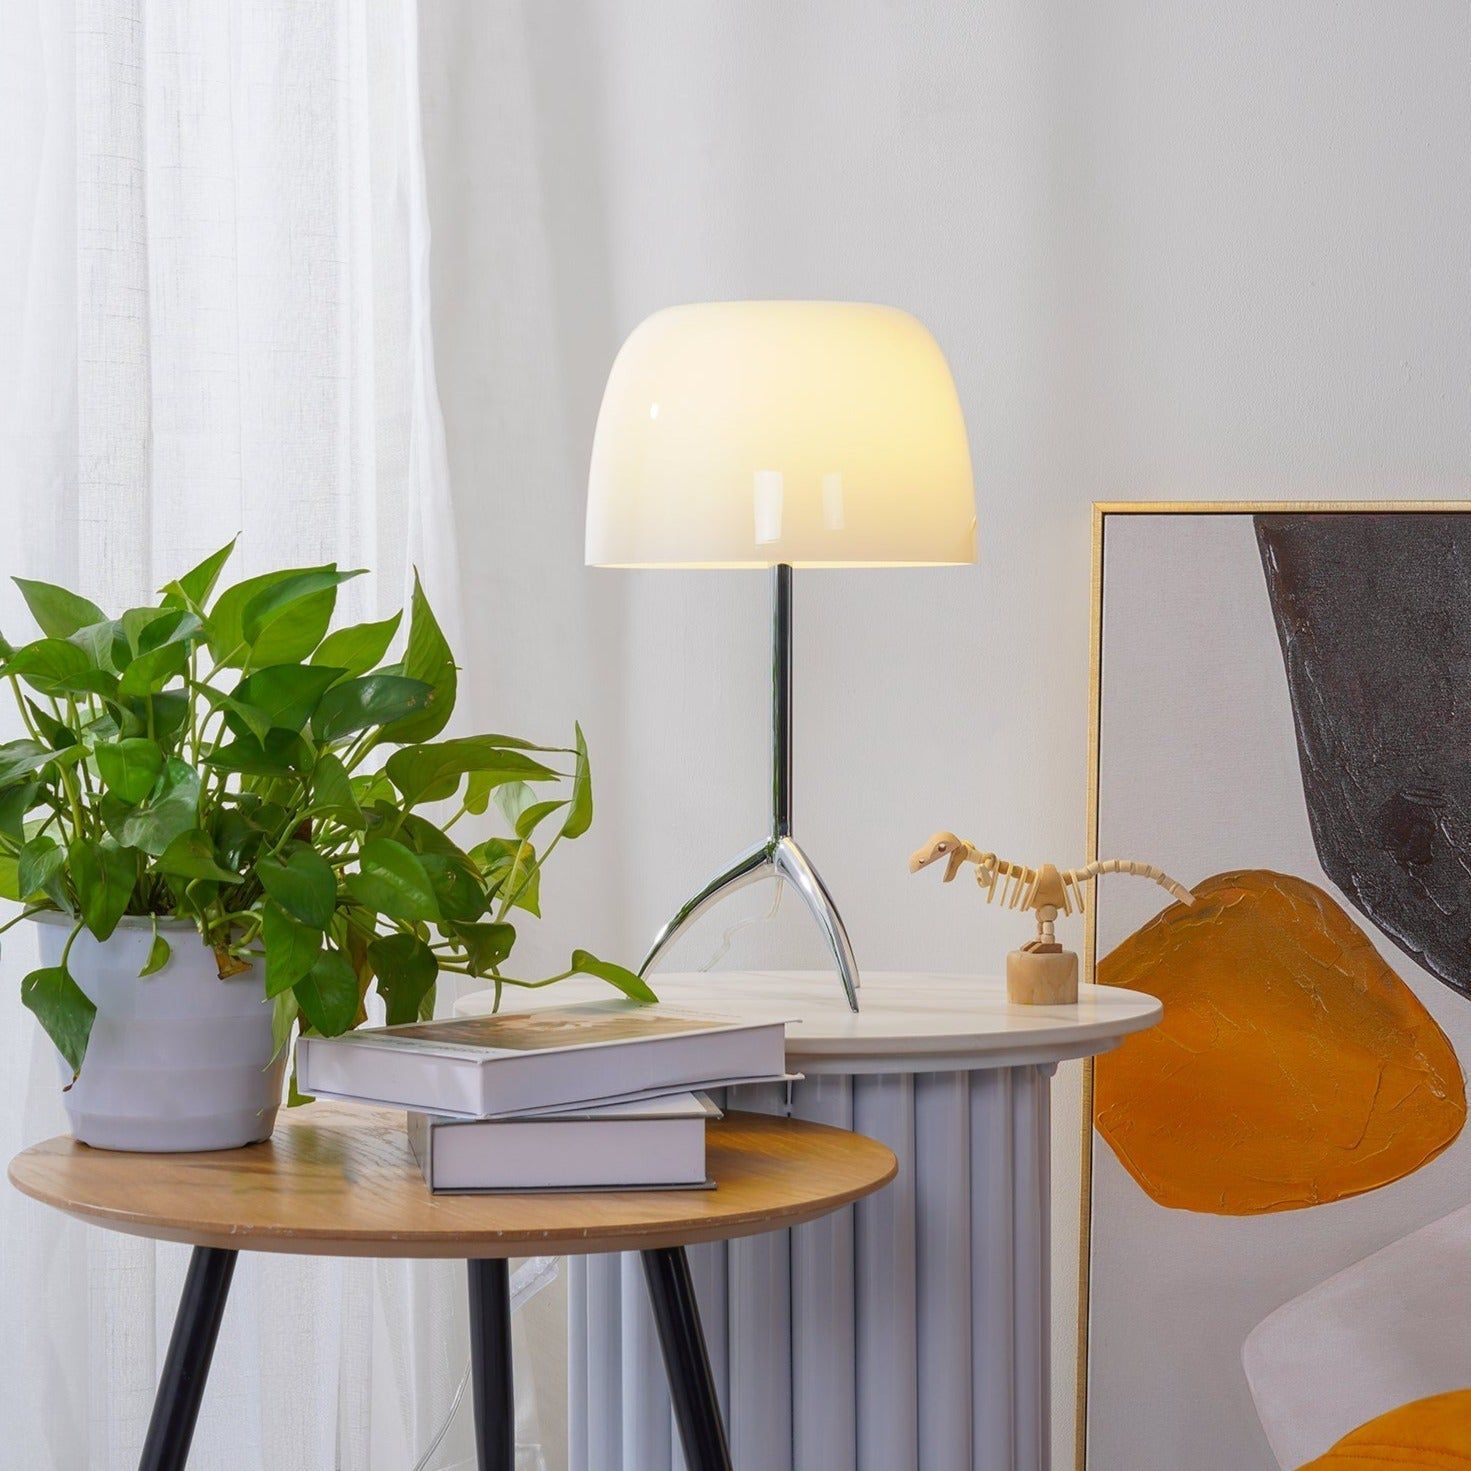 Bedside Lamp Designs Innovative and Stylish Options for Bedroom Lighting